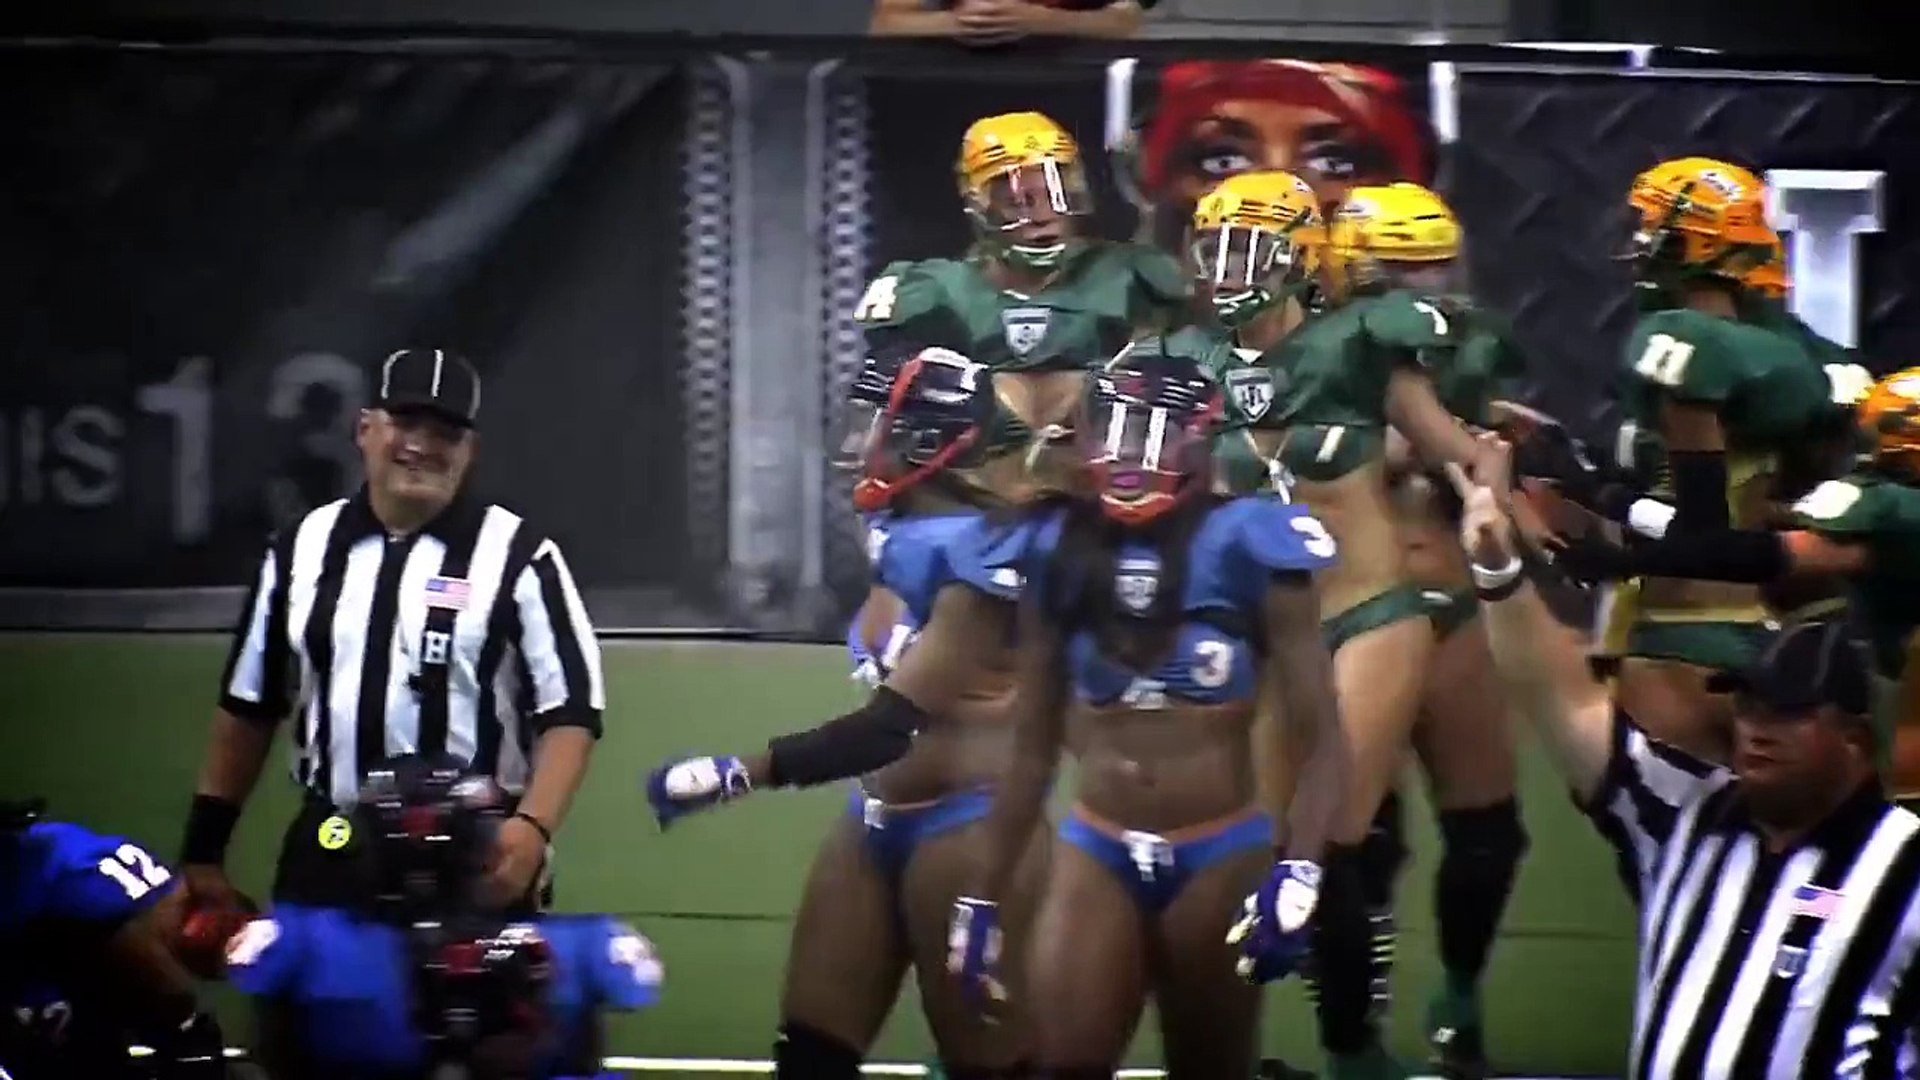 LFL (Lingerie Football) Big Hits, Fights, and Funny Moments - Dailymotion  Video